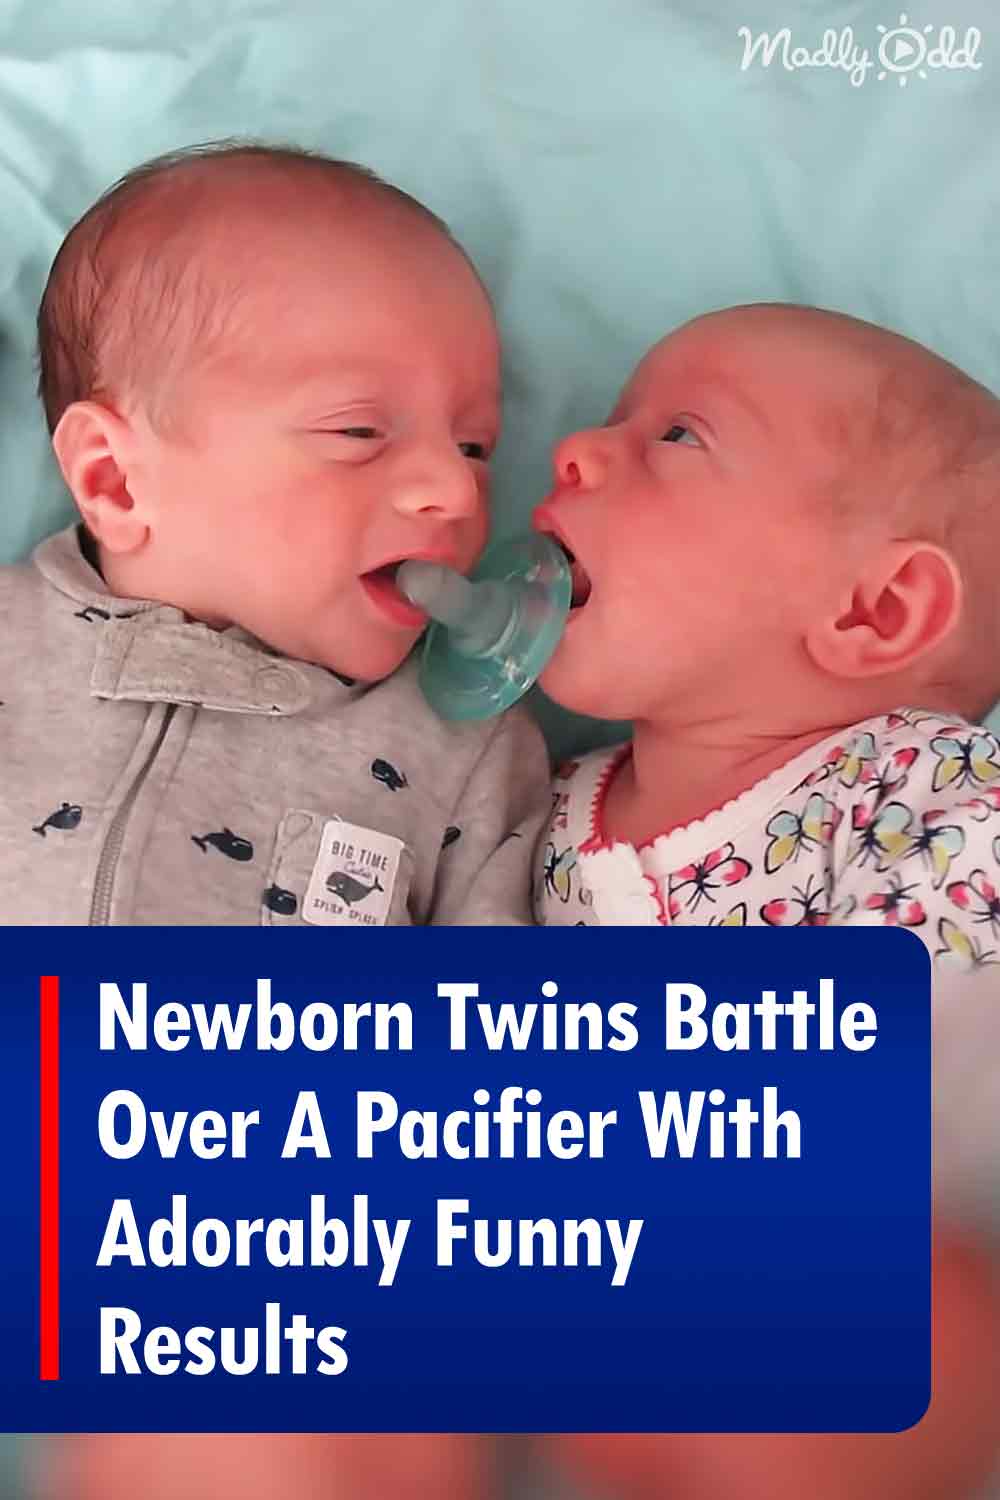 Newborn Twins Battle Over A Pacifier With Adorably Funny Results